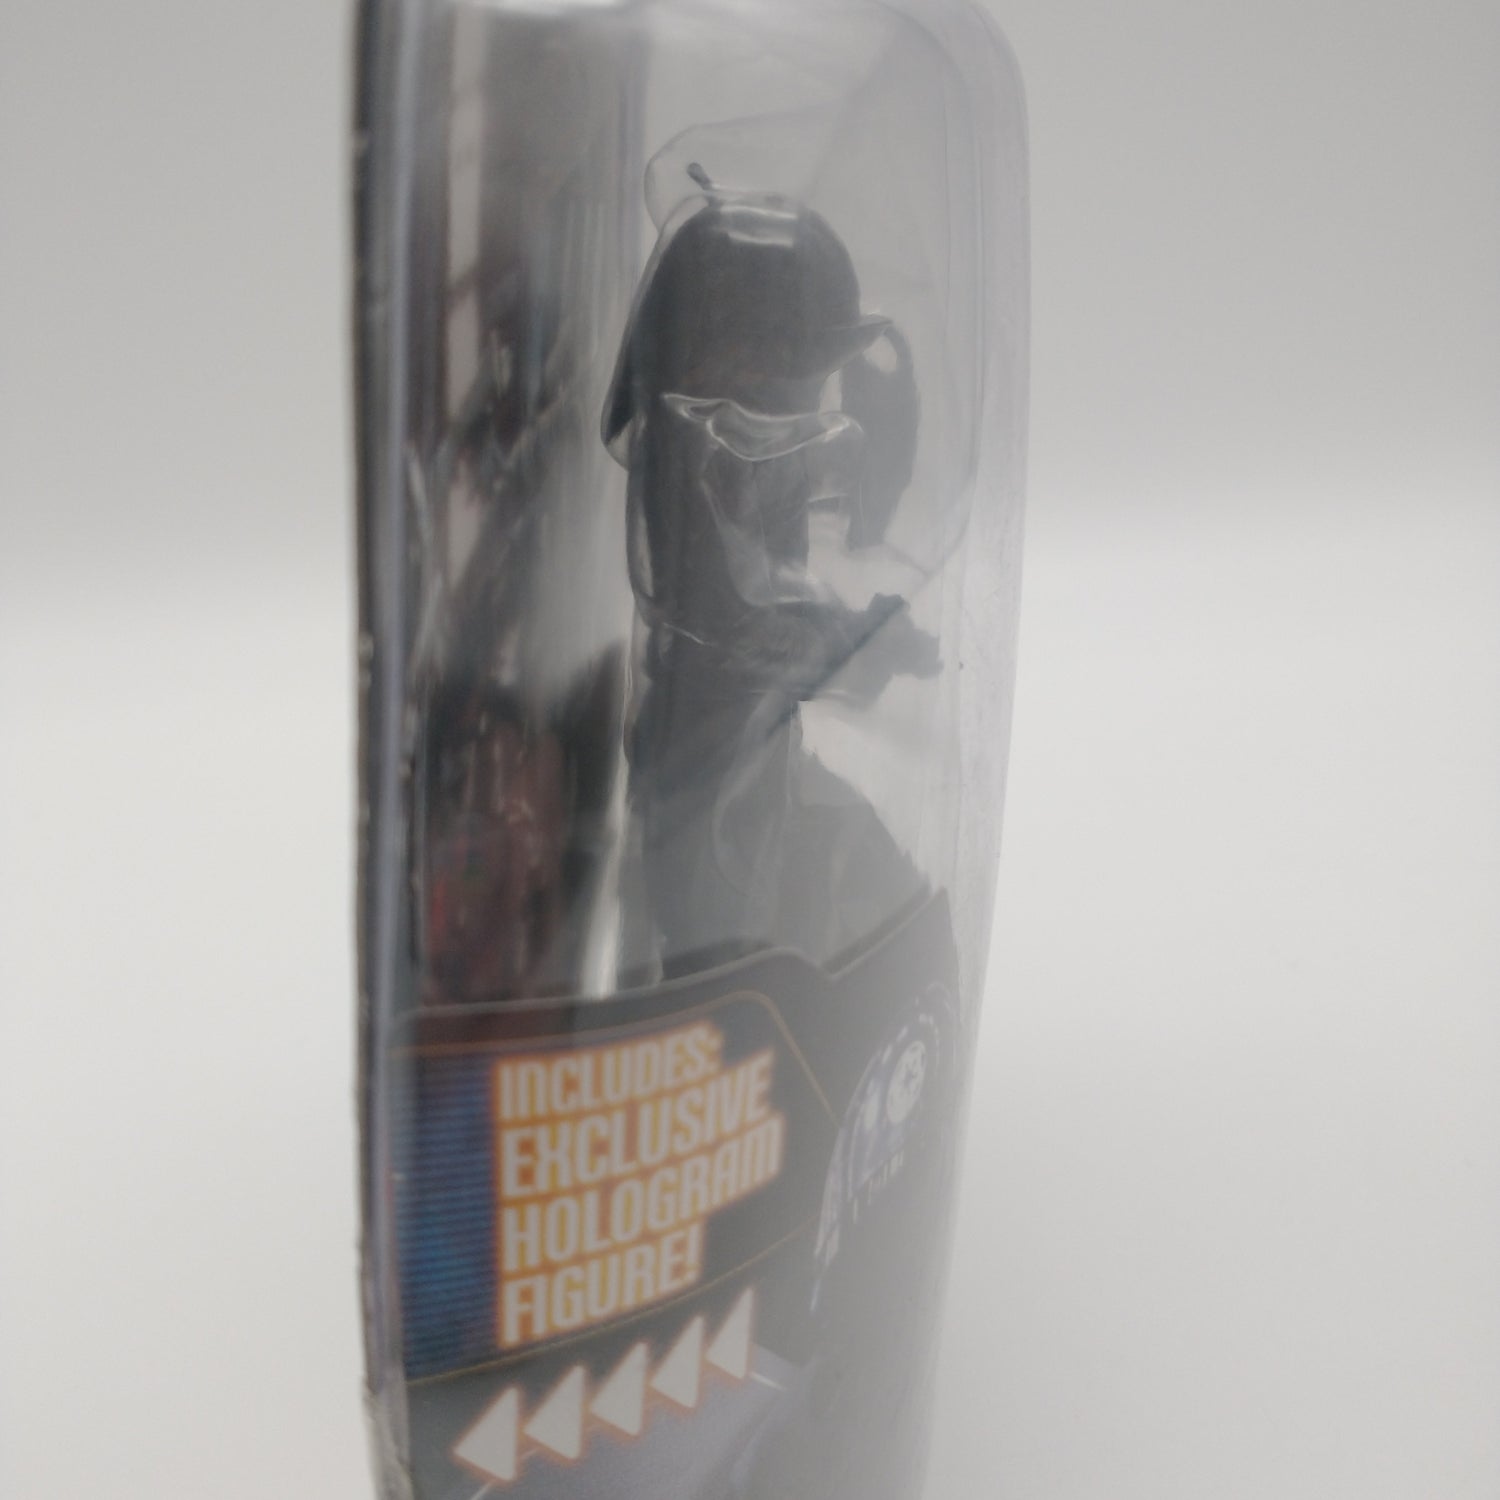 A picture of the left side of the cart and bubble. The action figure is inside.